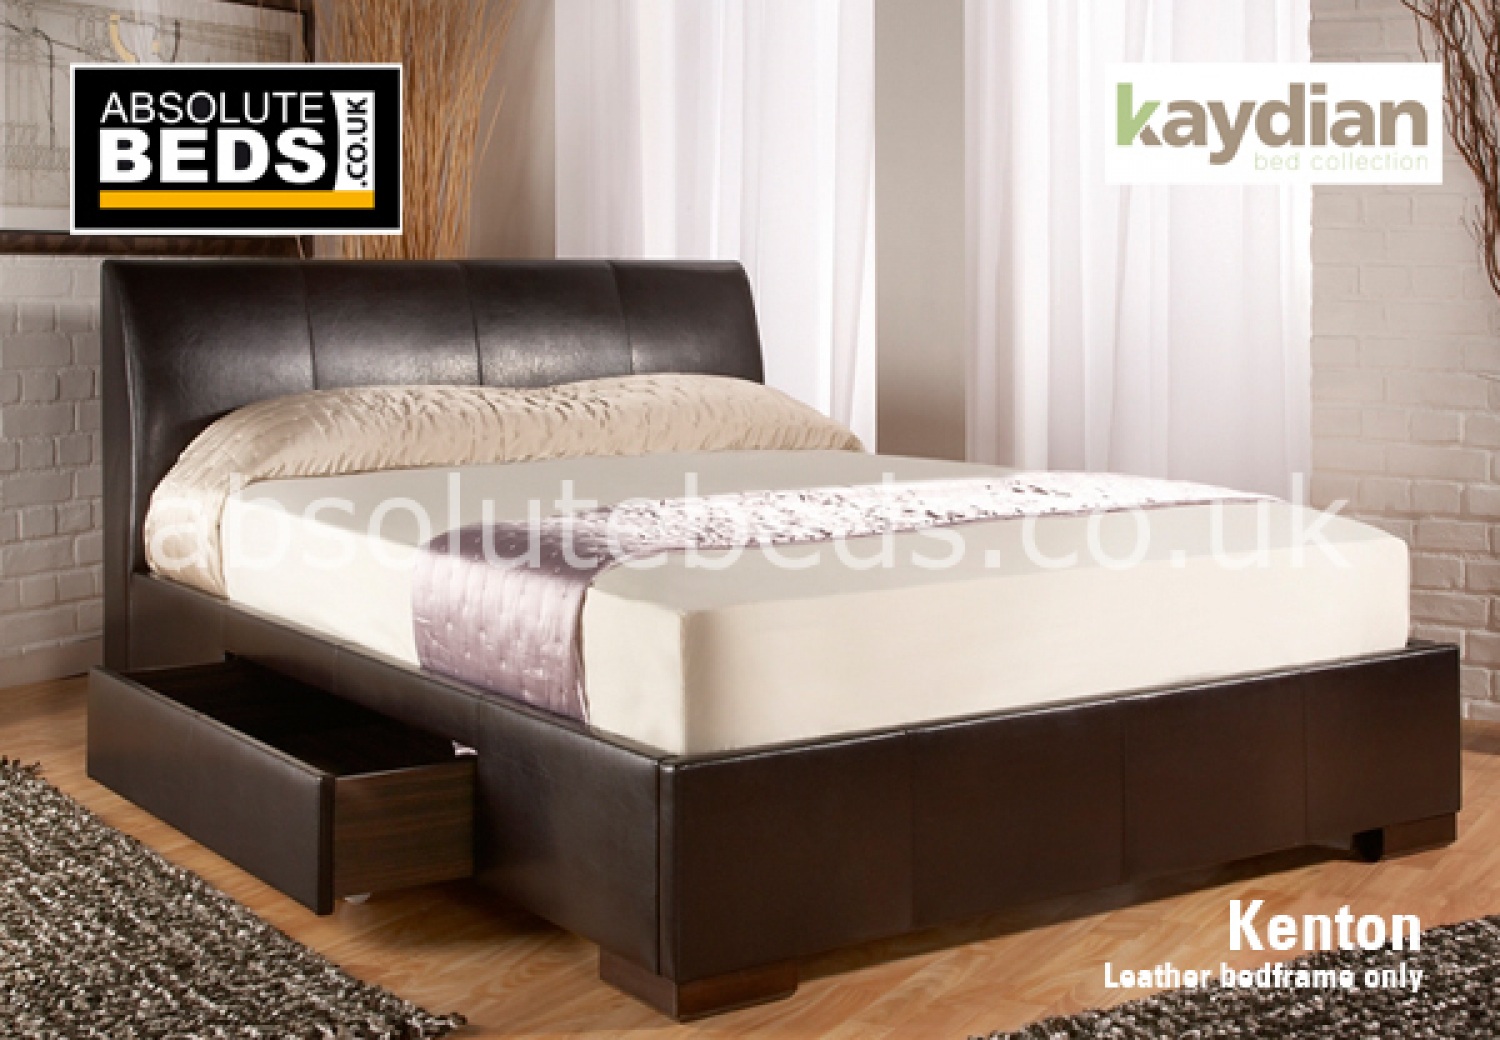 Kaydian Kenton Bycast Faux Leather Bed frame with storage drawers image